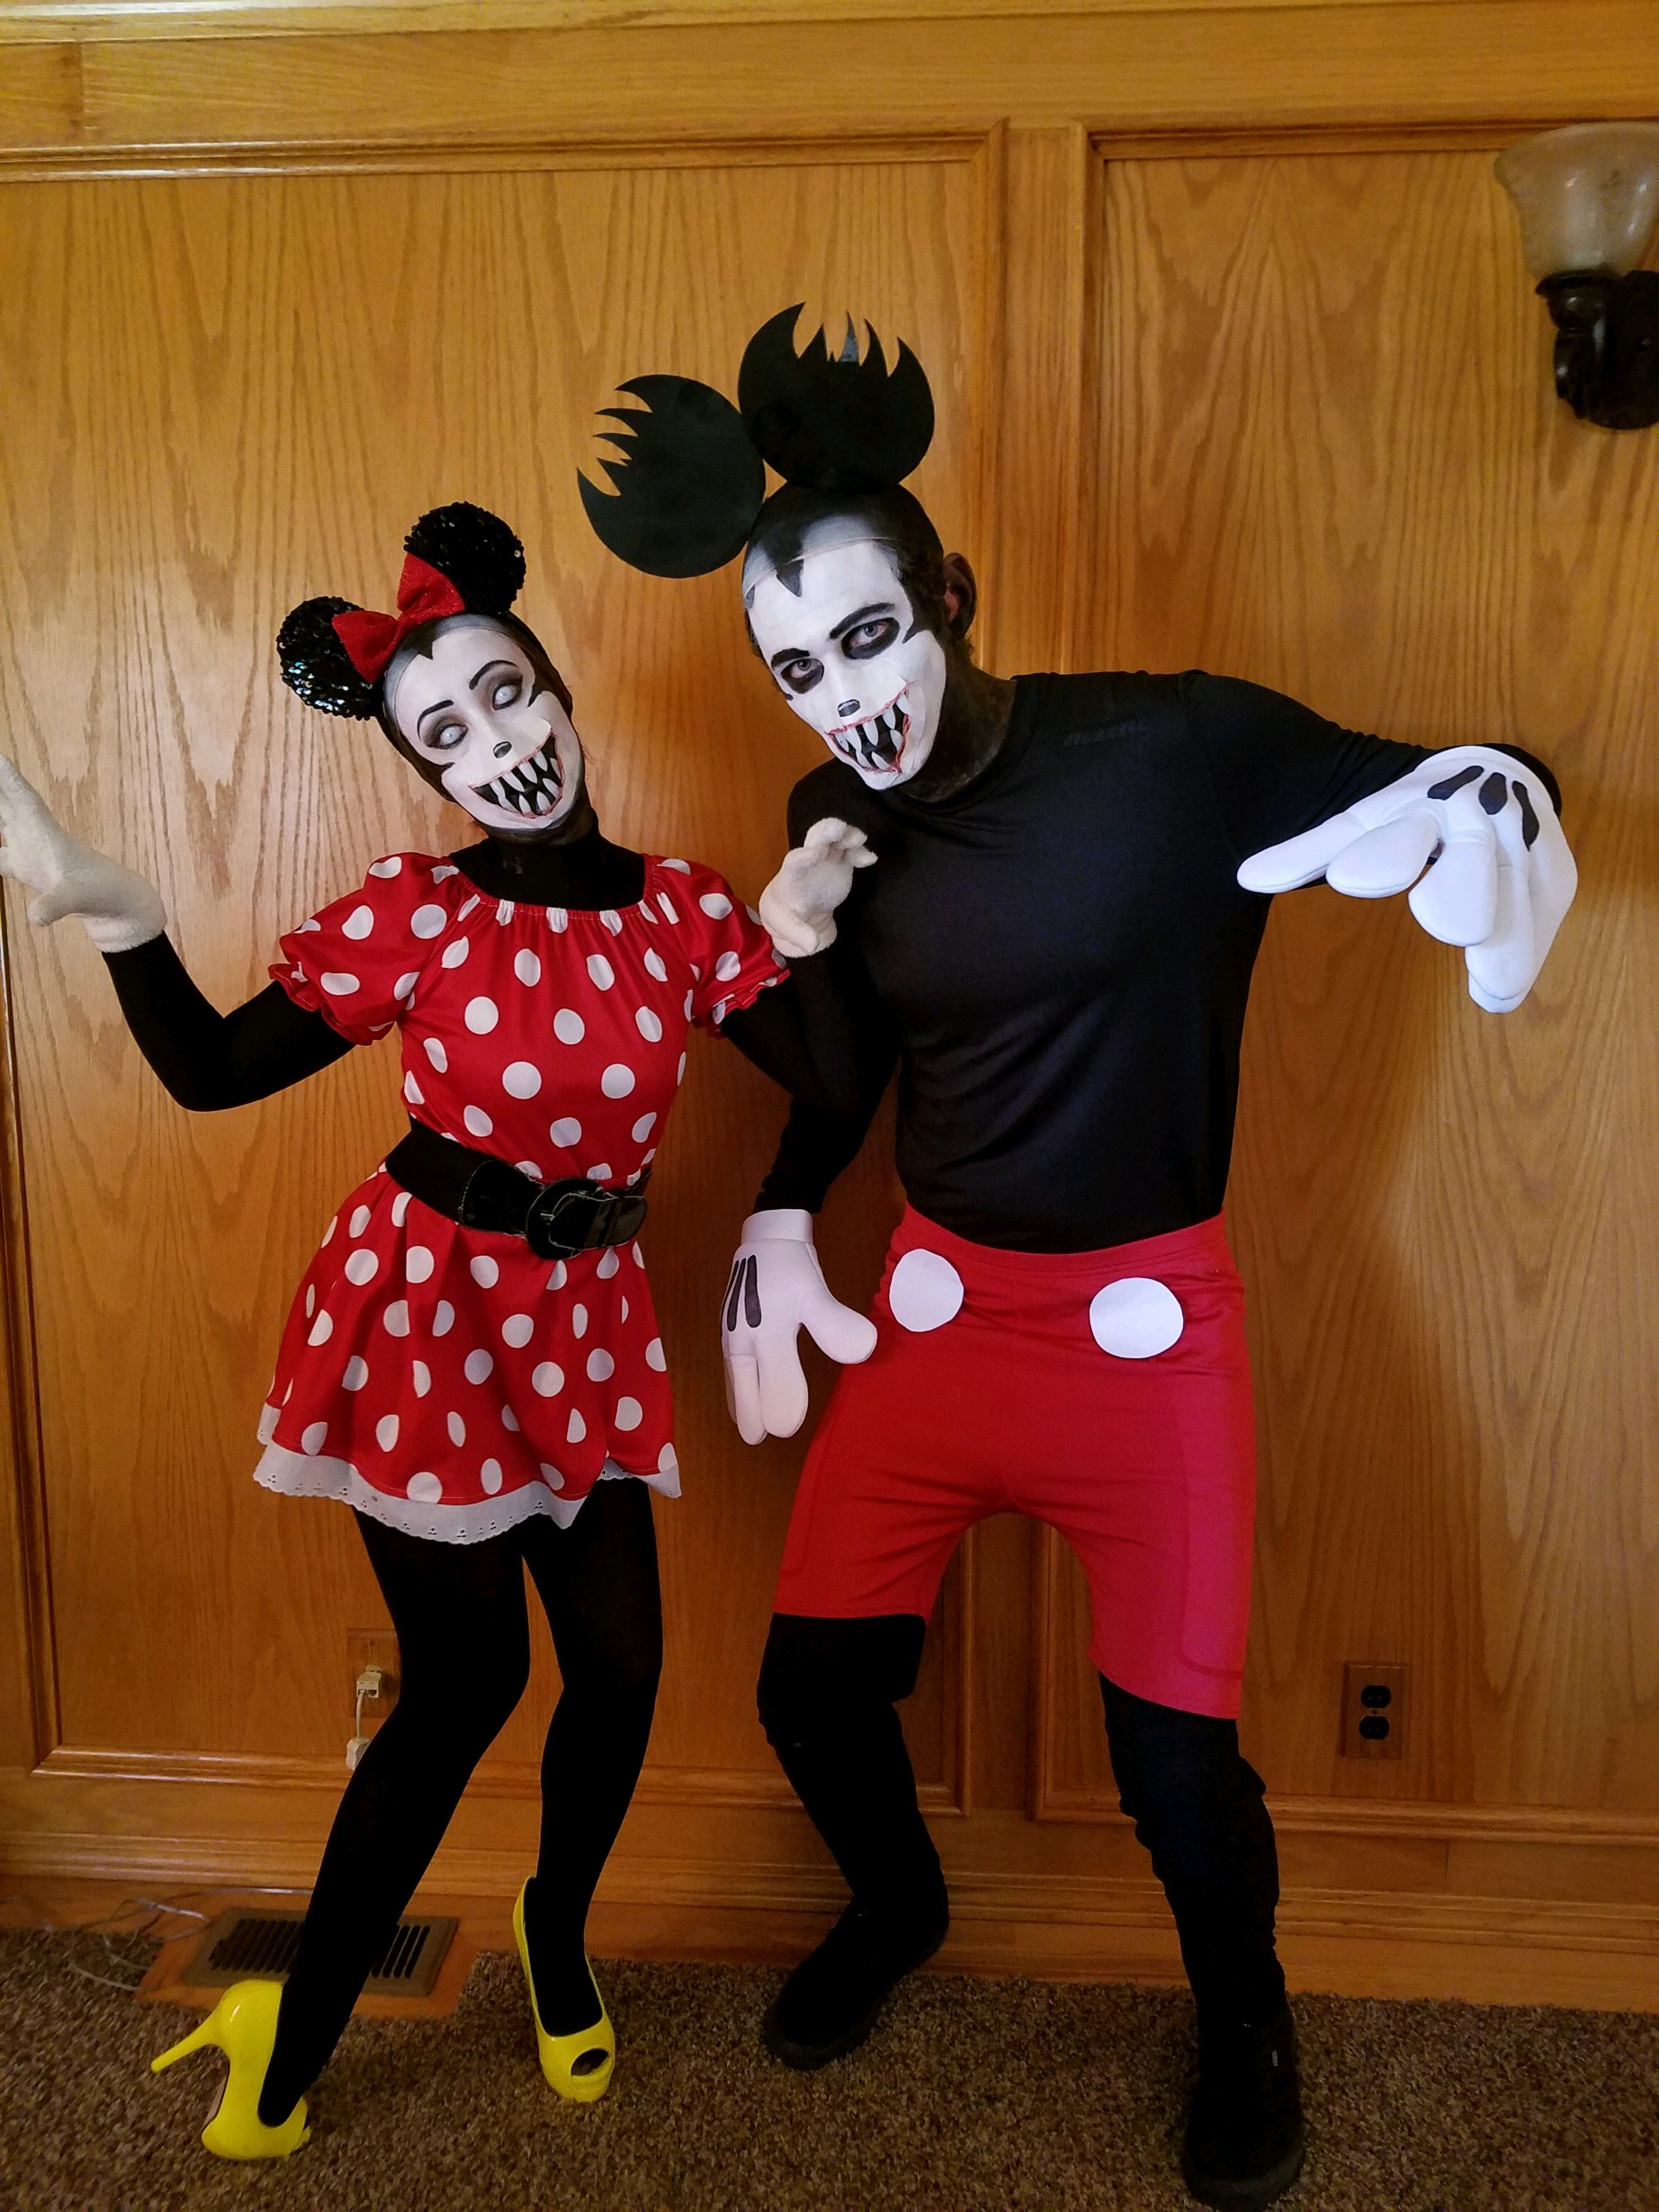 DIY Mickey & Minnie Mouse Costume  Minnie mouse costume diy, Minnie mouse  halloween costume, Minnie costume